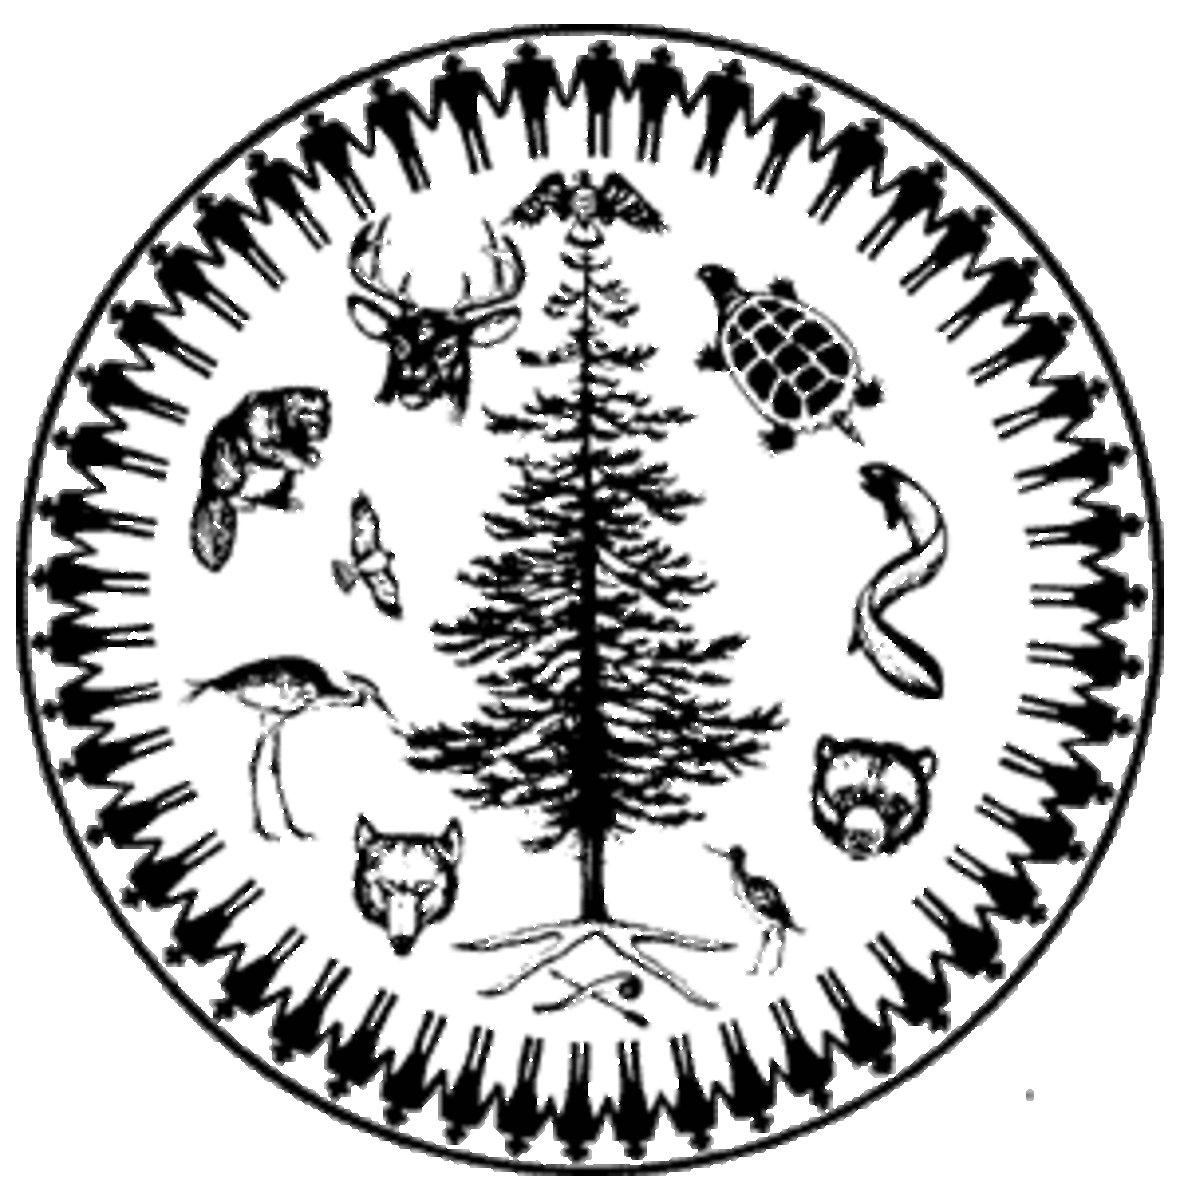 Seal of the Haudenosaunee. The people around the outside ring are the 50 tribal chiefs, men and women.